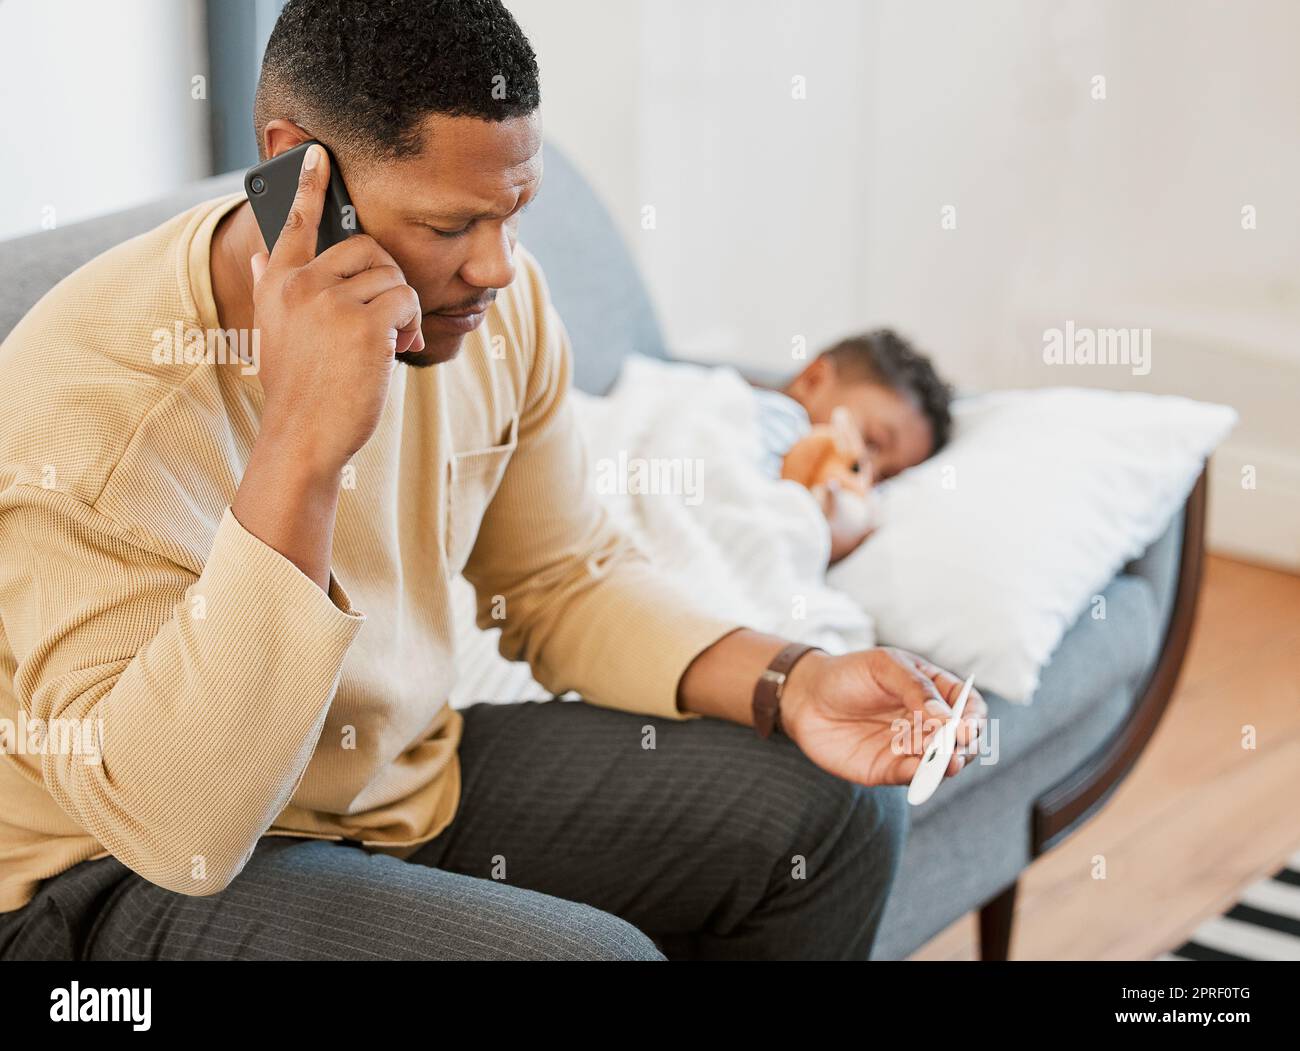 Worried father concerned, caring for sick son calling a doctor and taking temperature check of his sleeping kid at home. Parent consulting with professional and taking care of child with fever Stock Photo